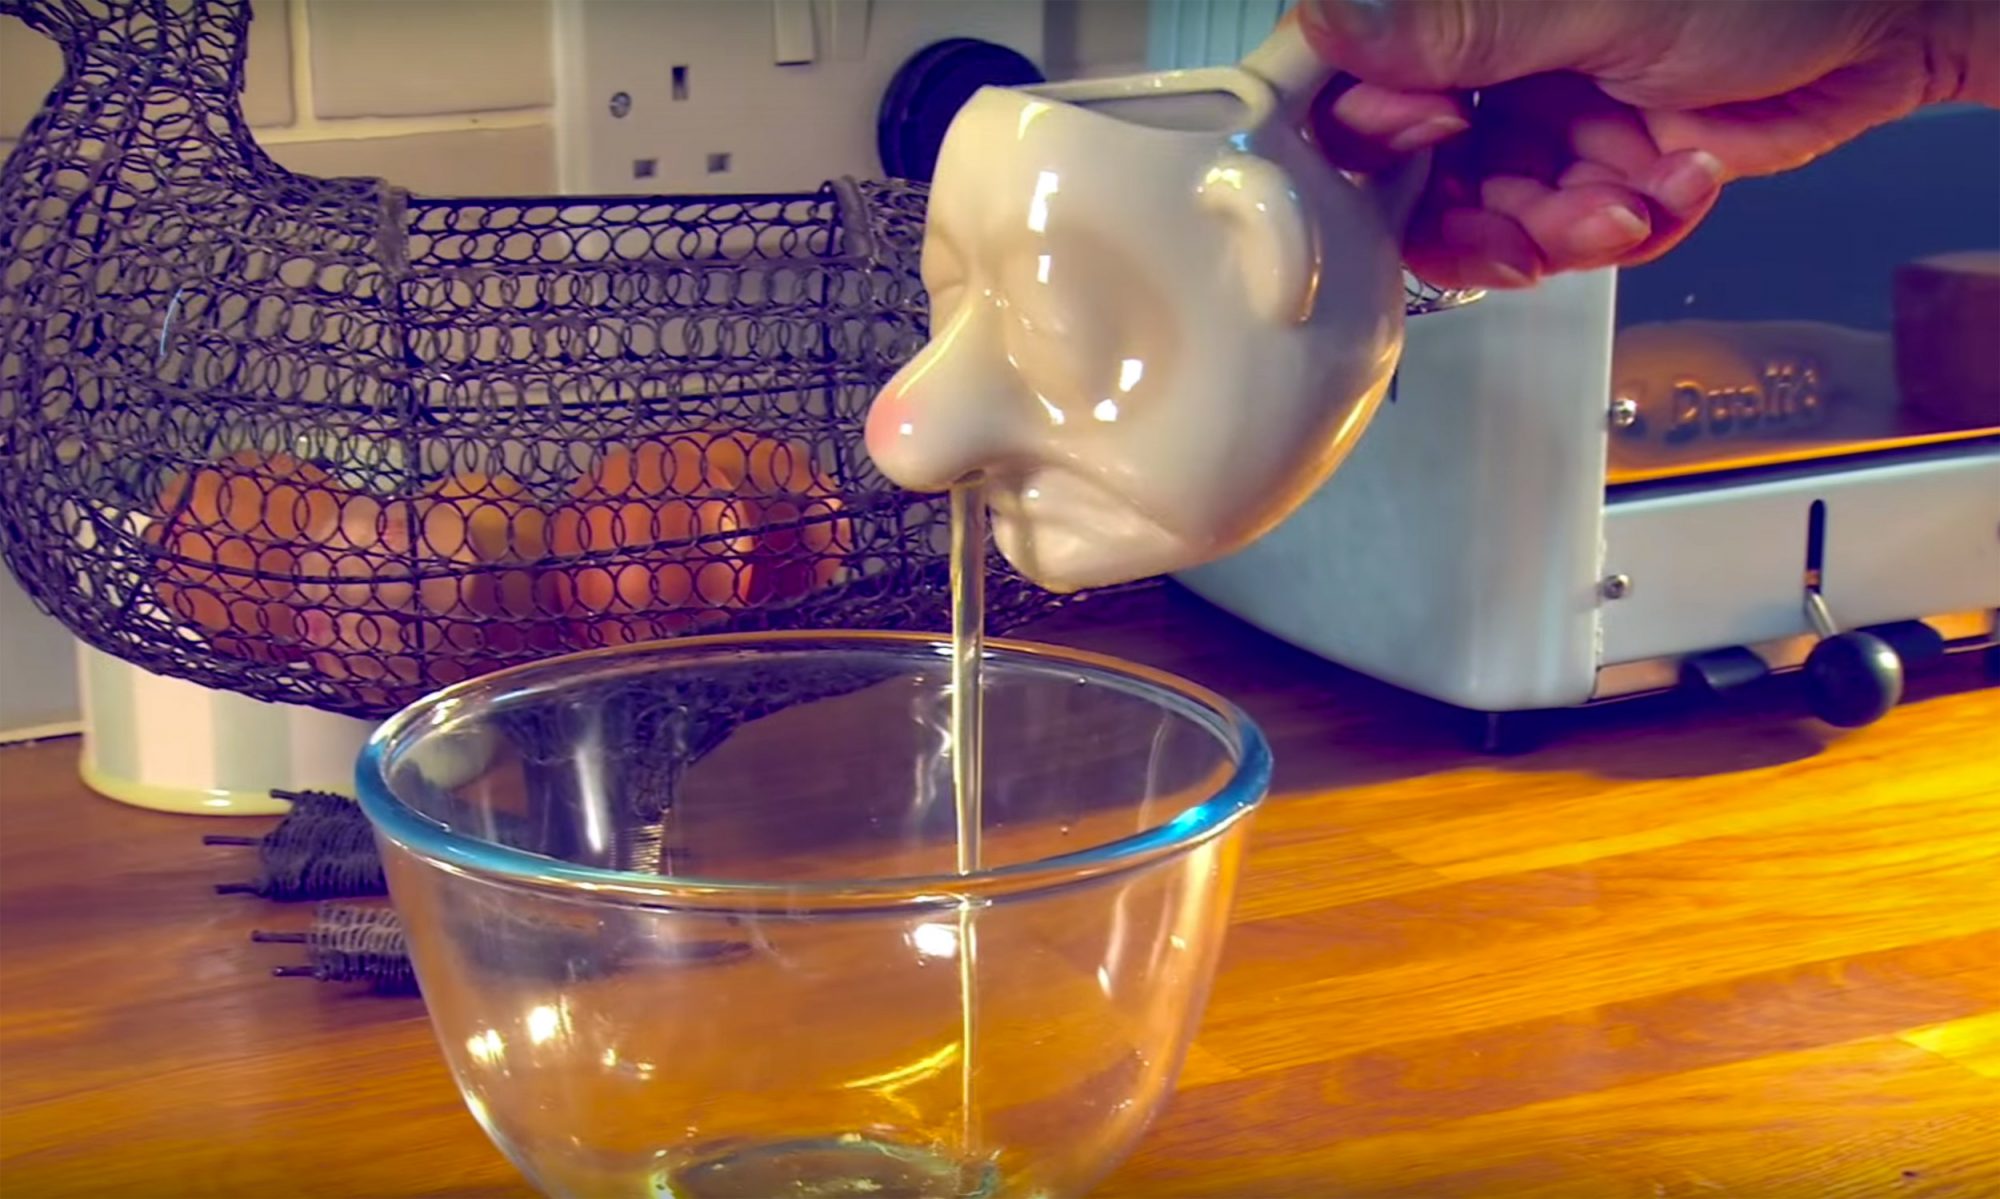 EC: The Mr. Sniffles Egg Separator Is the Grossest Way to Separate Eggs